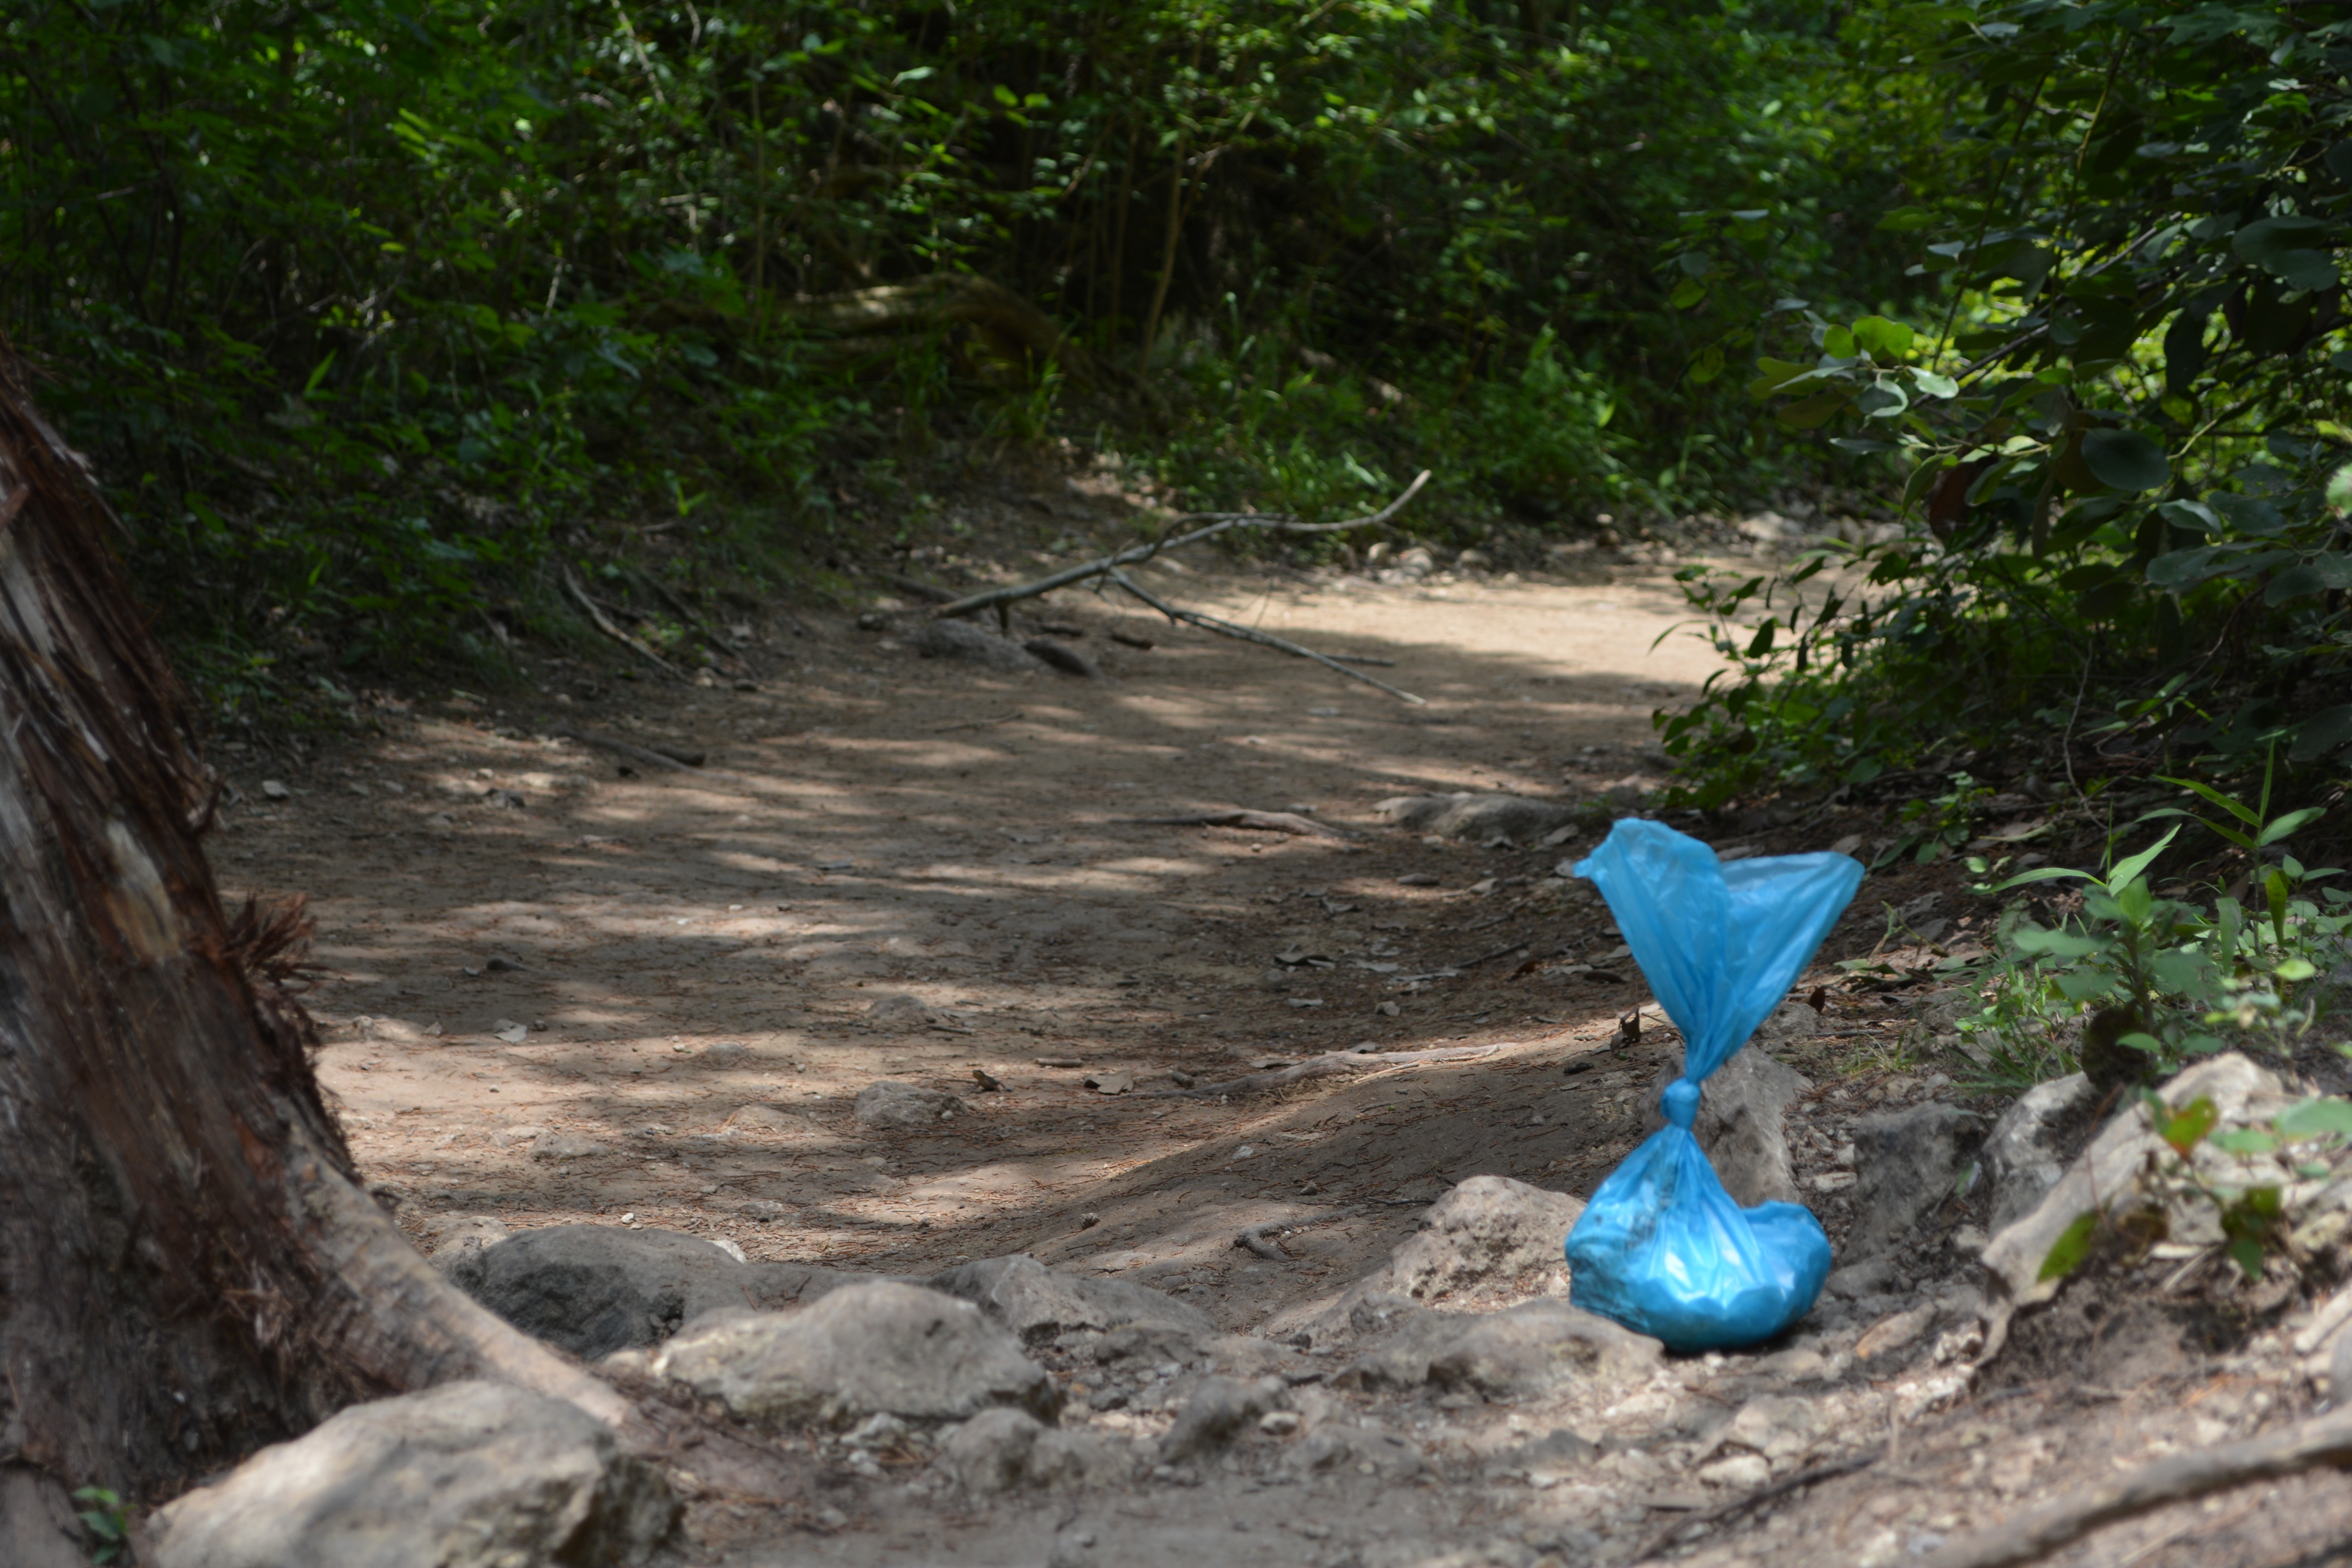 Discarding animal waste and trash on trails is unsanitary, unsightly and contributes to unhealthy levels of bacteria in the water.